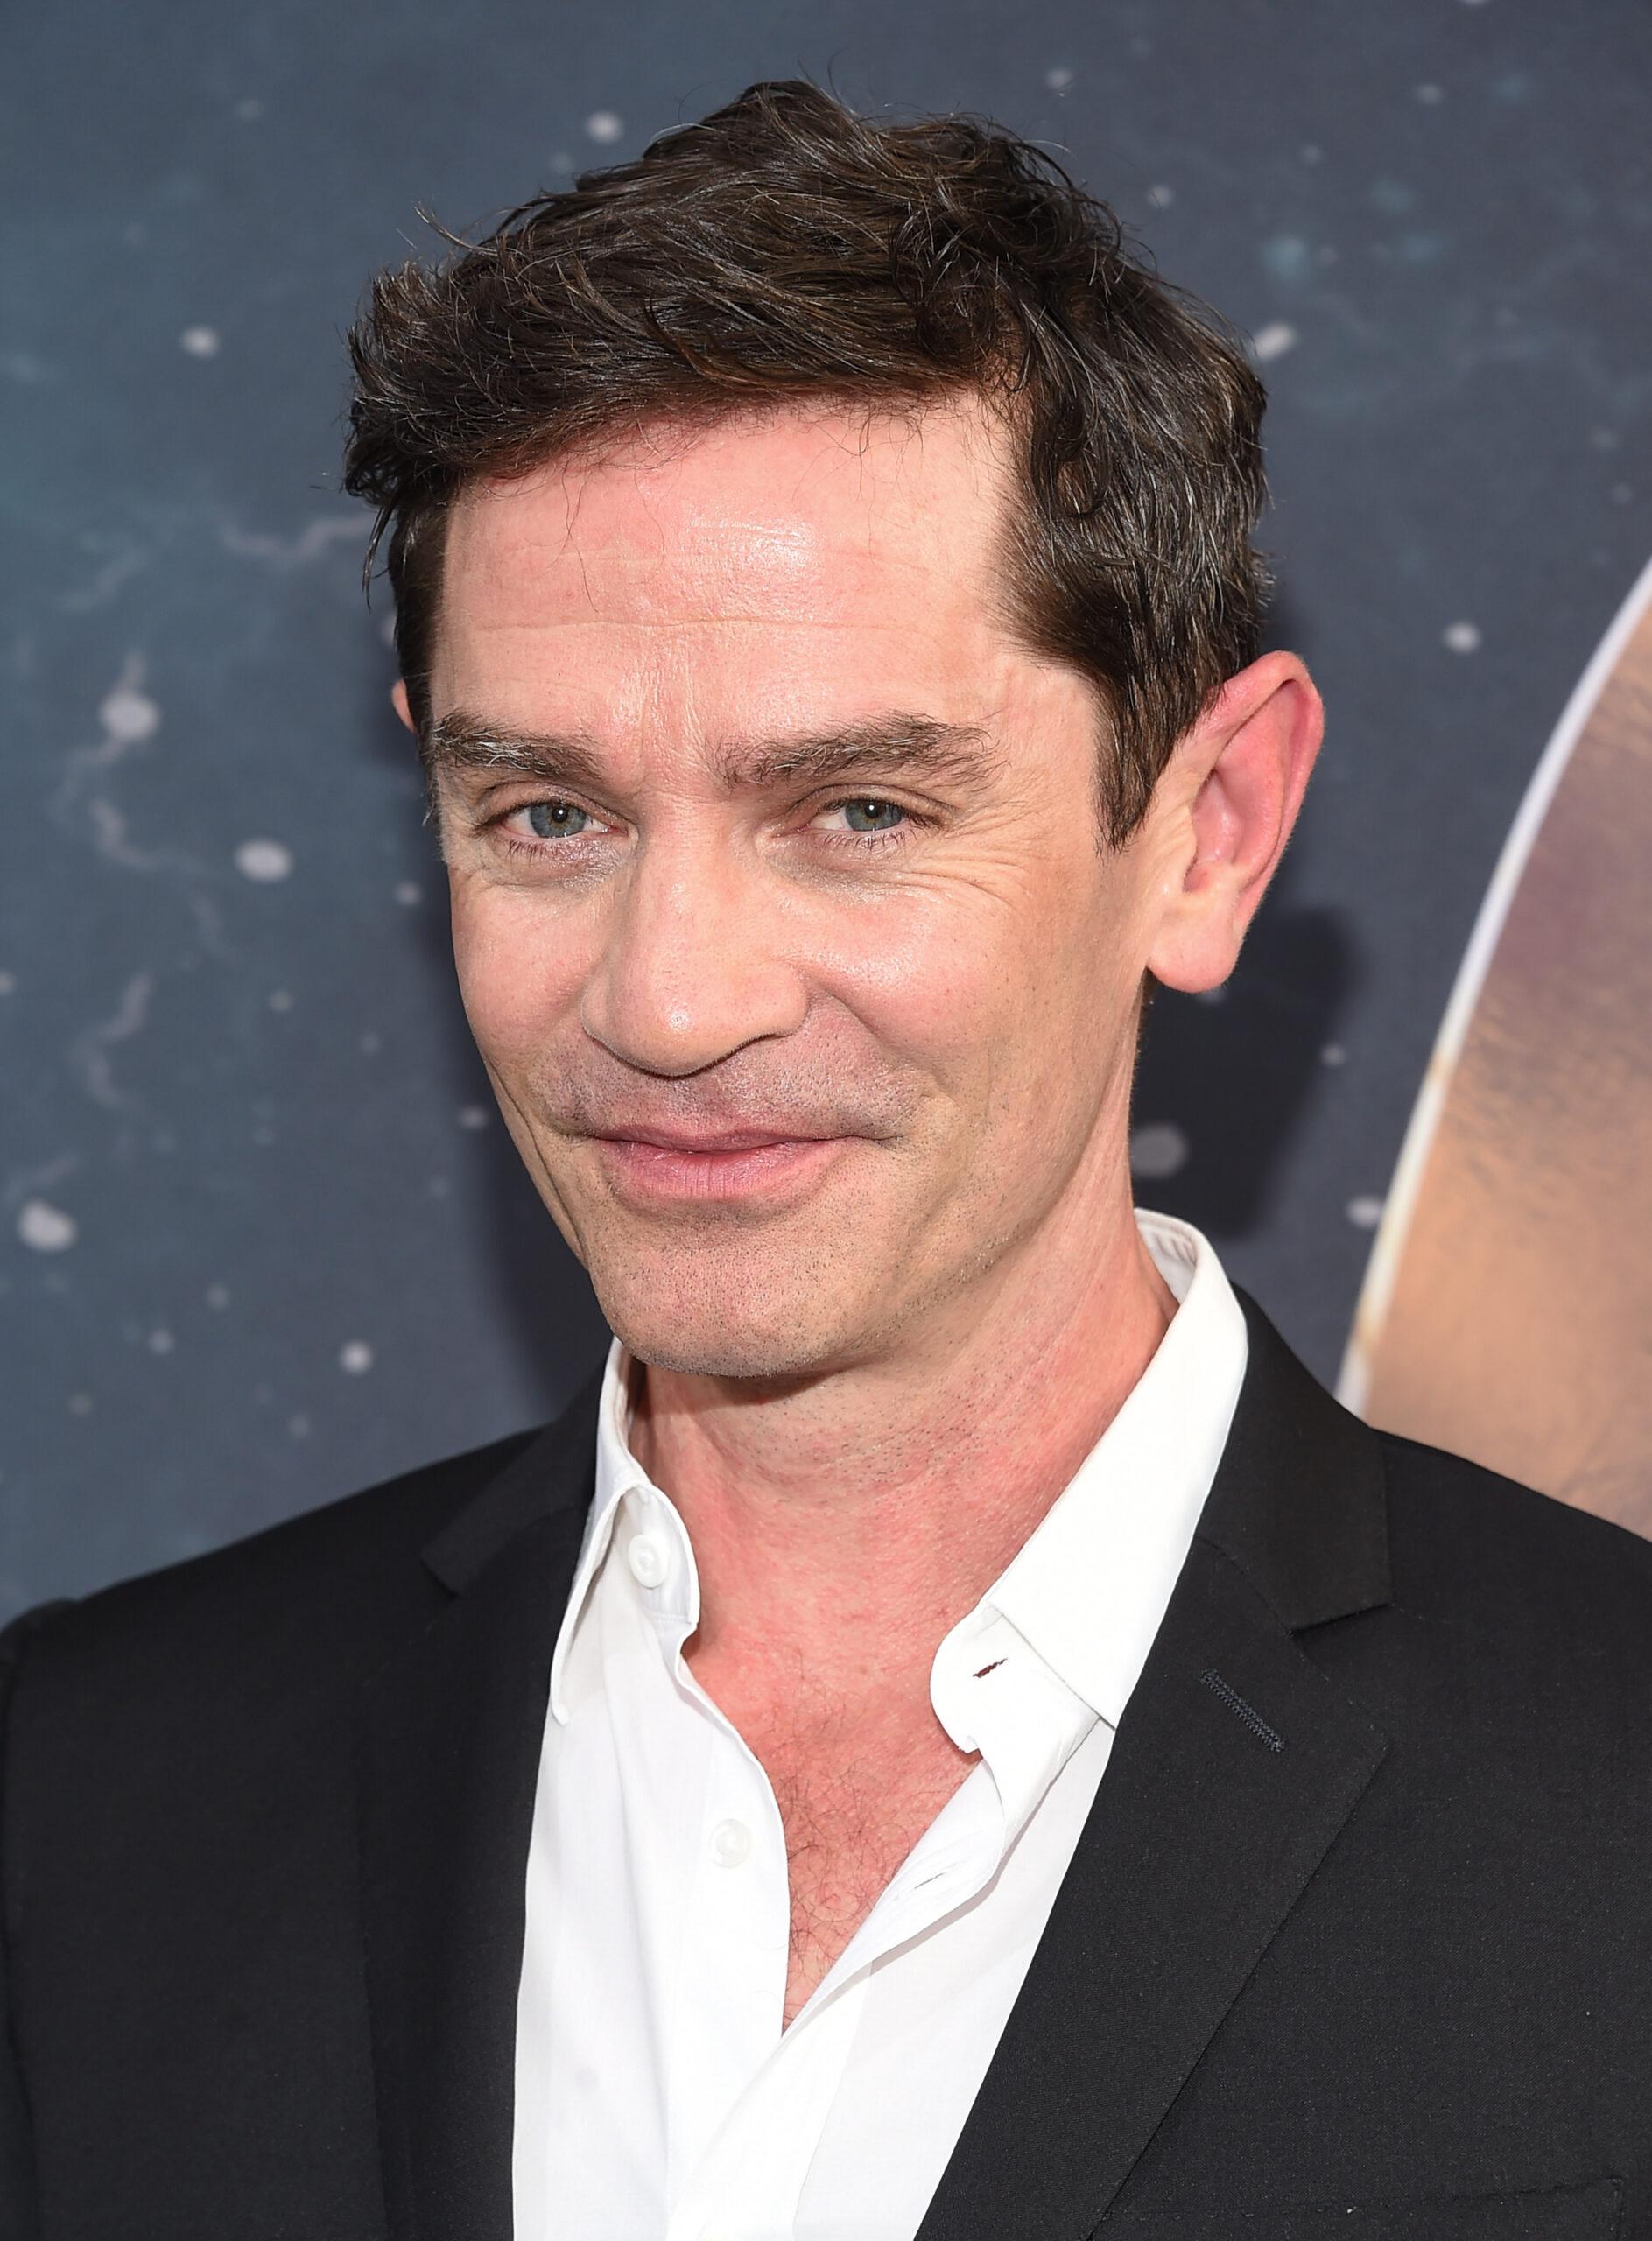 James Frain at the 'Star Trek: Discovery' Premiere